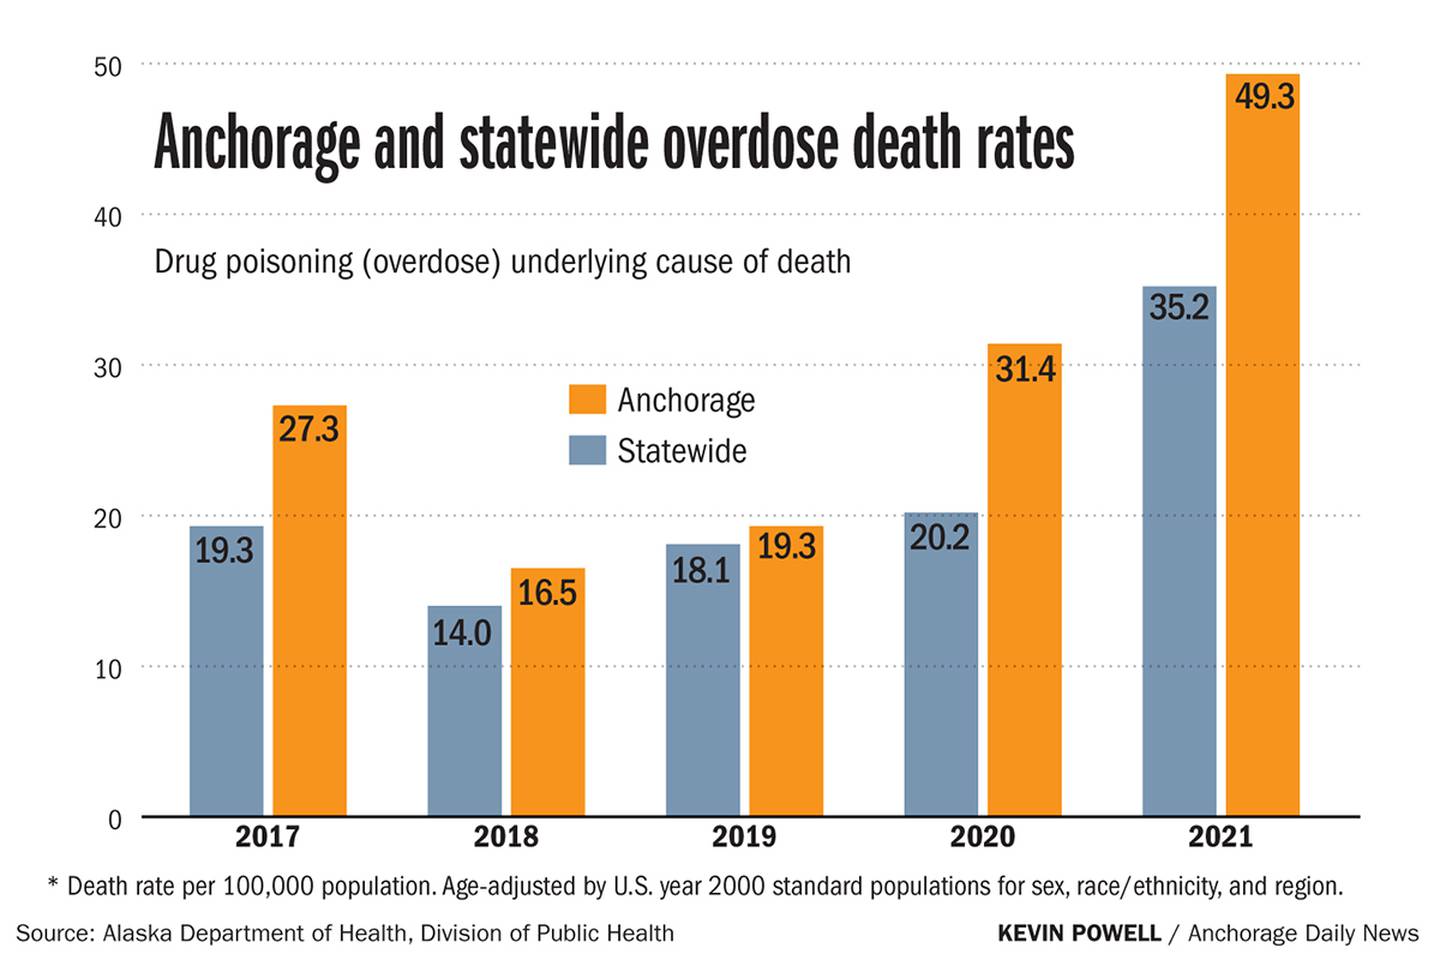 Anchorage and statewide drug overdoses